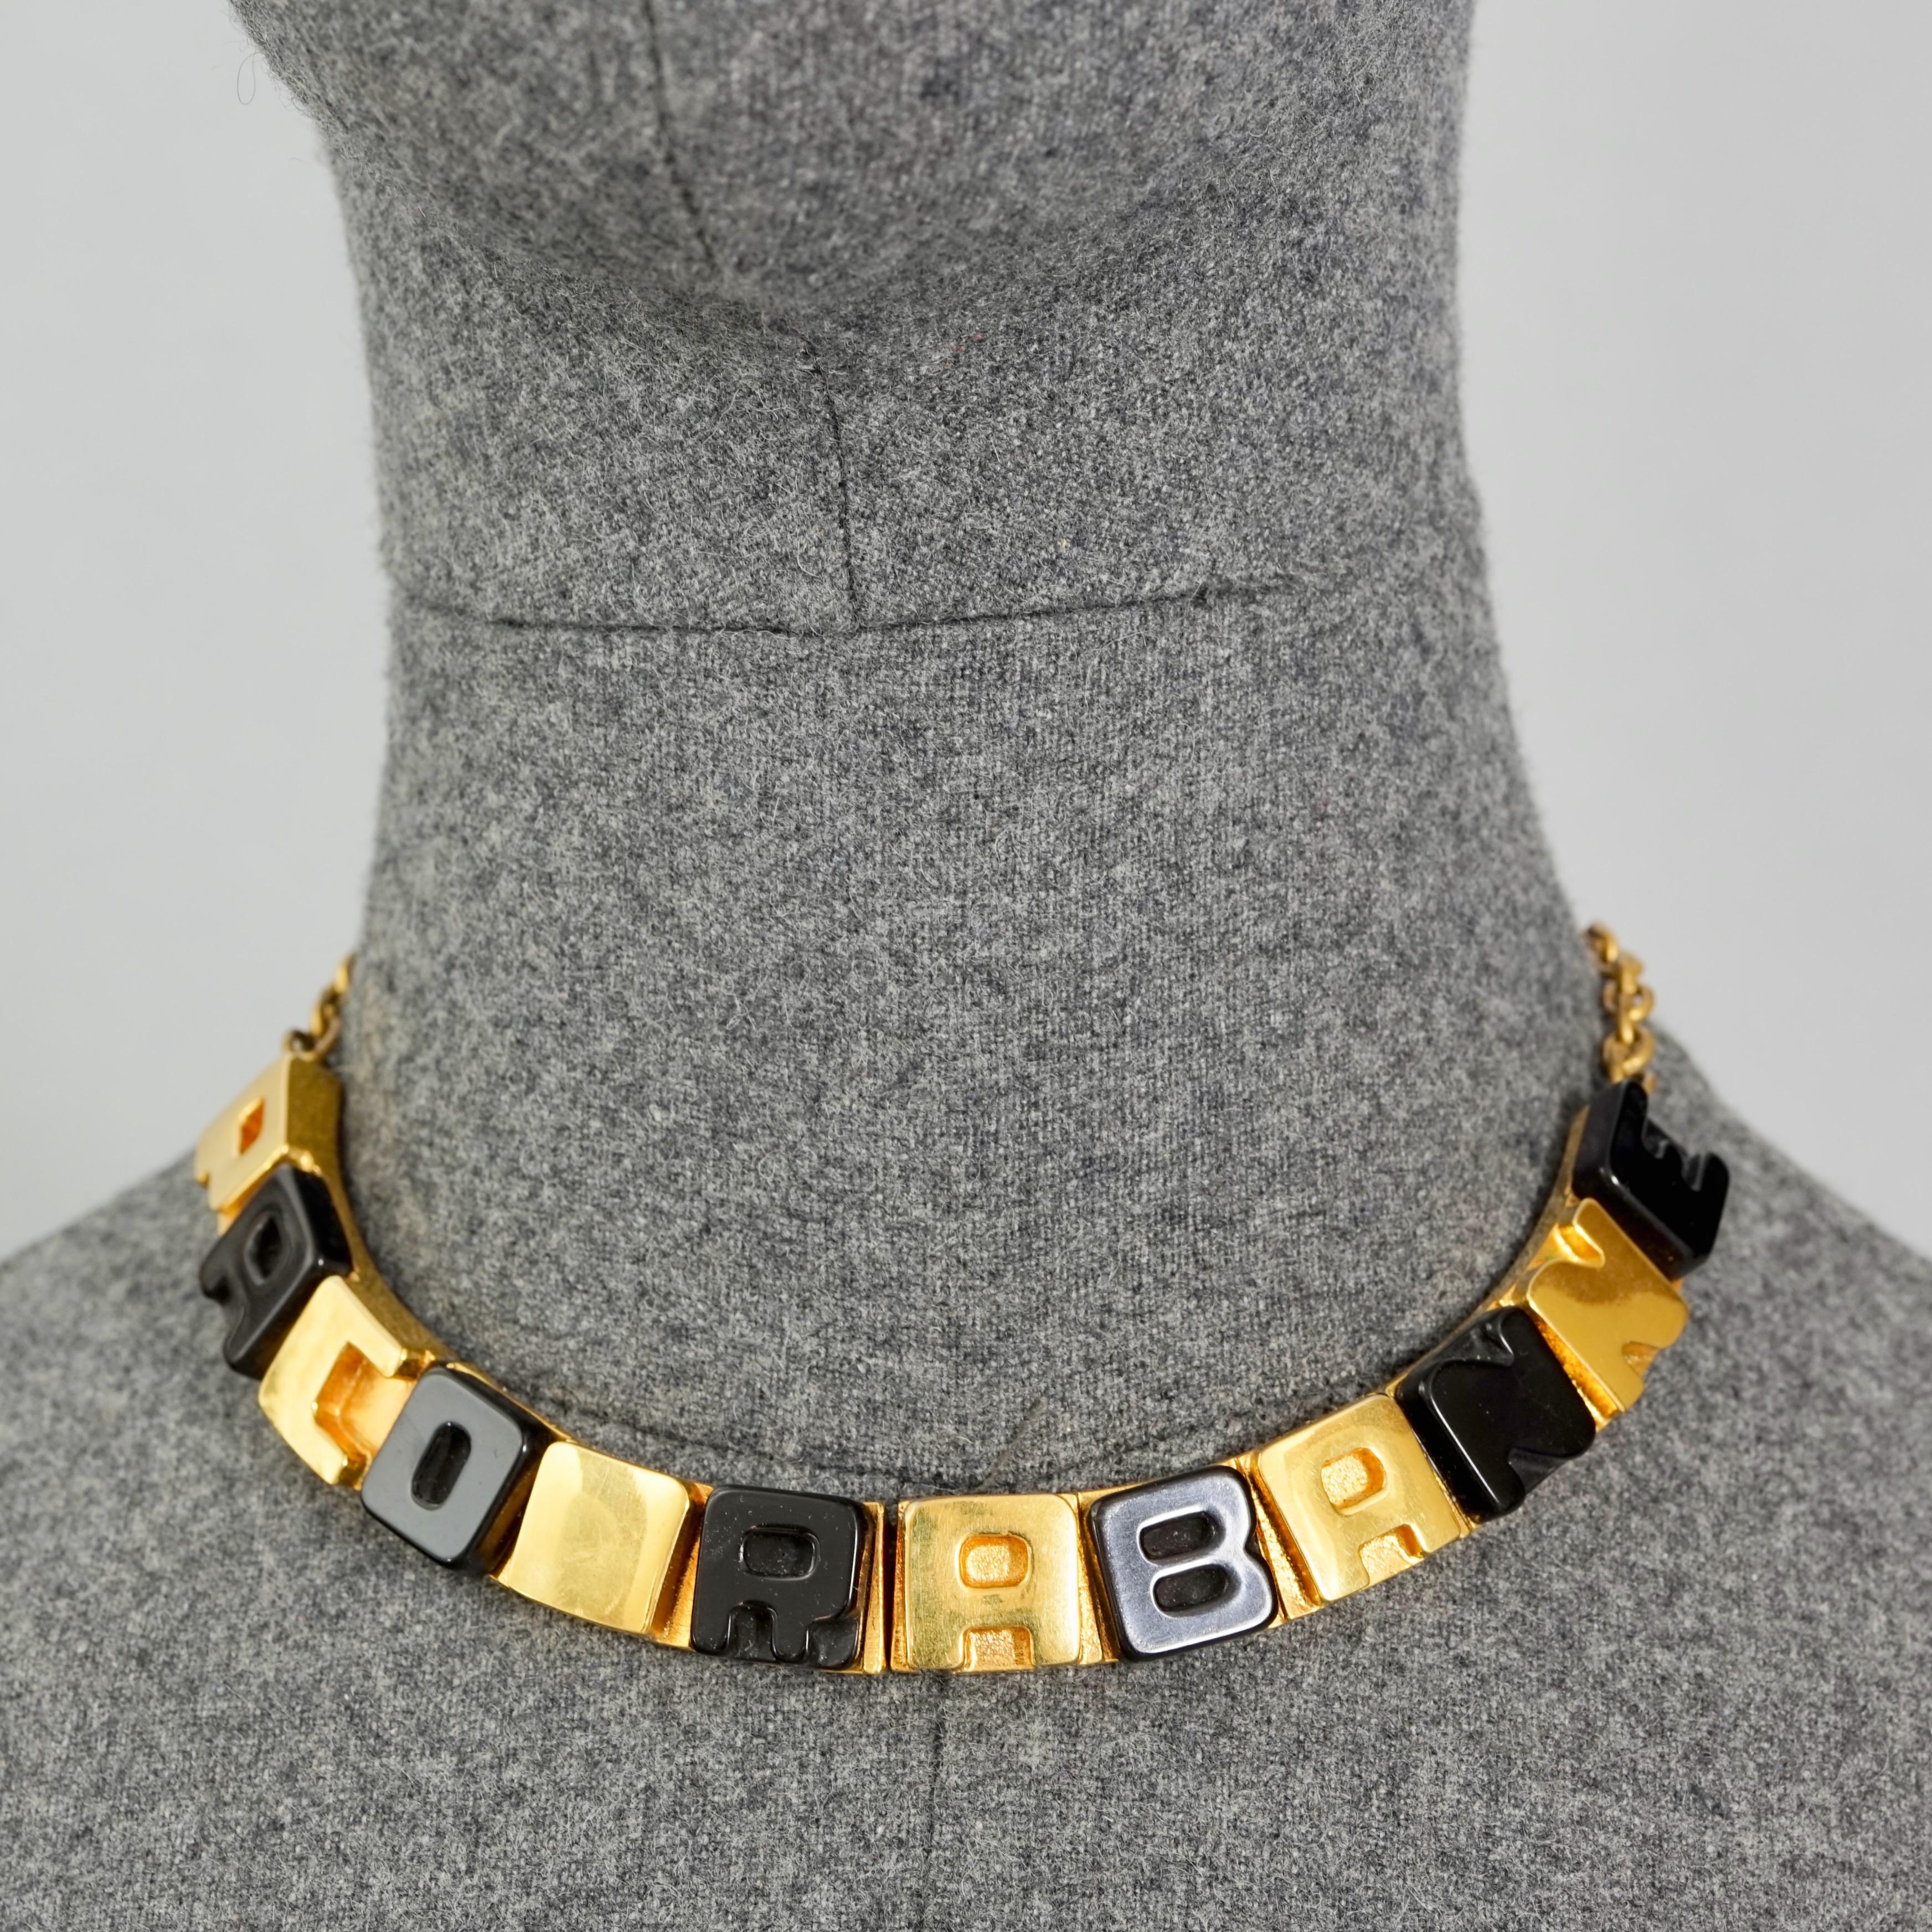 Vintage PACO RABANNE Gold Black Cube Letter Necklace

Measurements:
Height: 0.59 inch (1.5 cm)
Wearable Length: 14.96 inches (38 cm) Adjustable

Features:
- 100% Authentic PACO RABANNE.
- Cube letter charms spelled PACO RABANNE.
- Gold and black